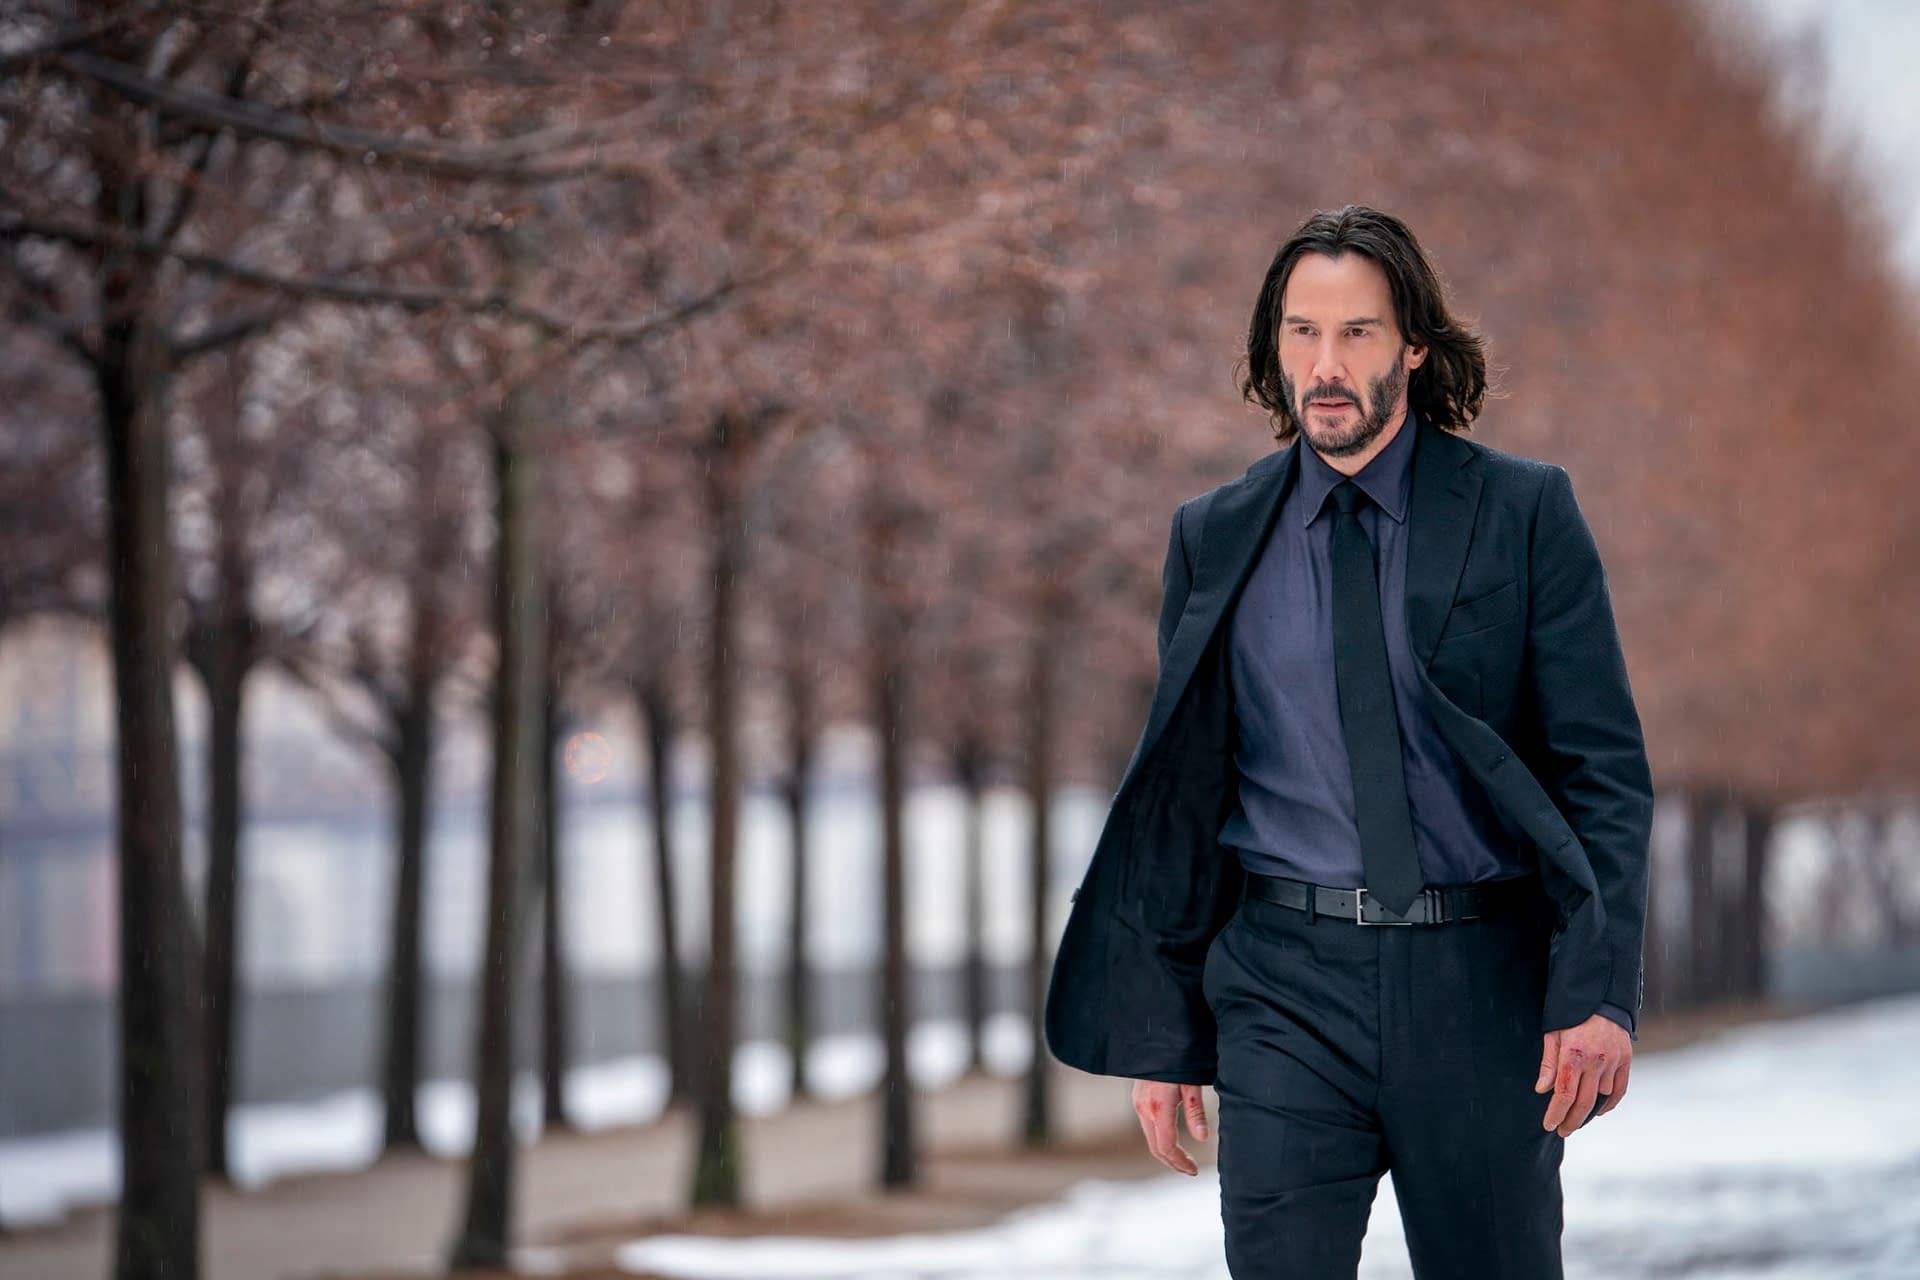 John Wick 5': Everything We Know About Keanu Reeves' Future as John Wick